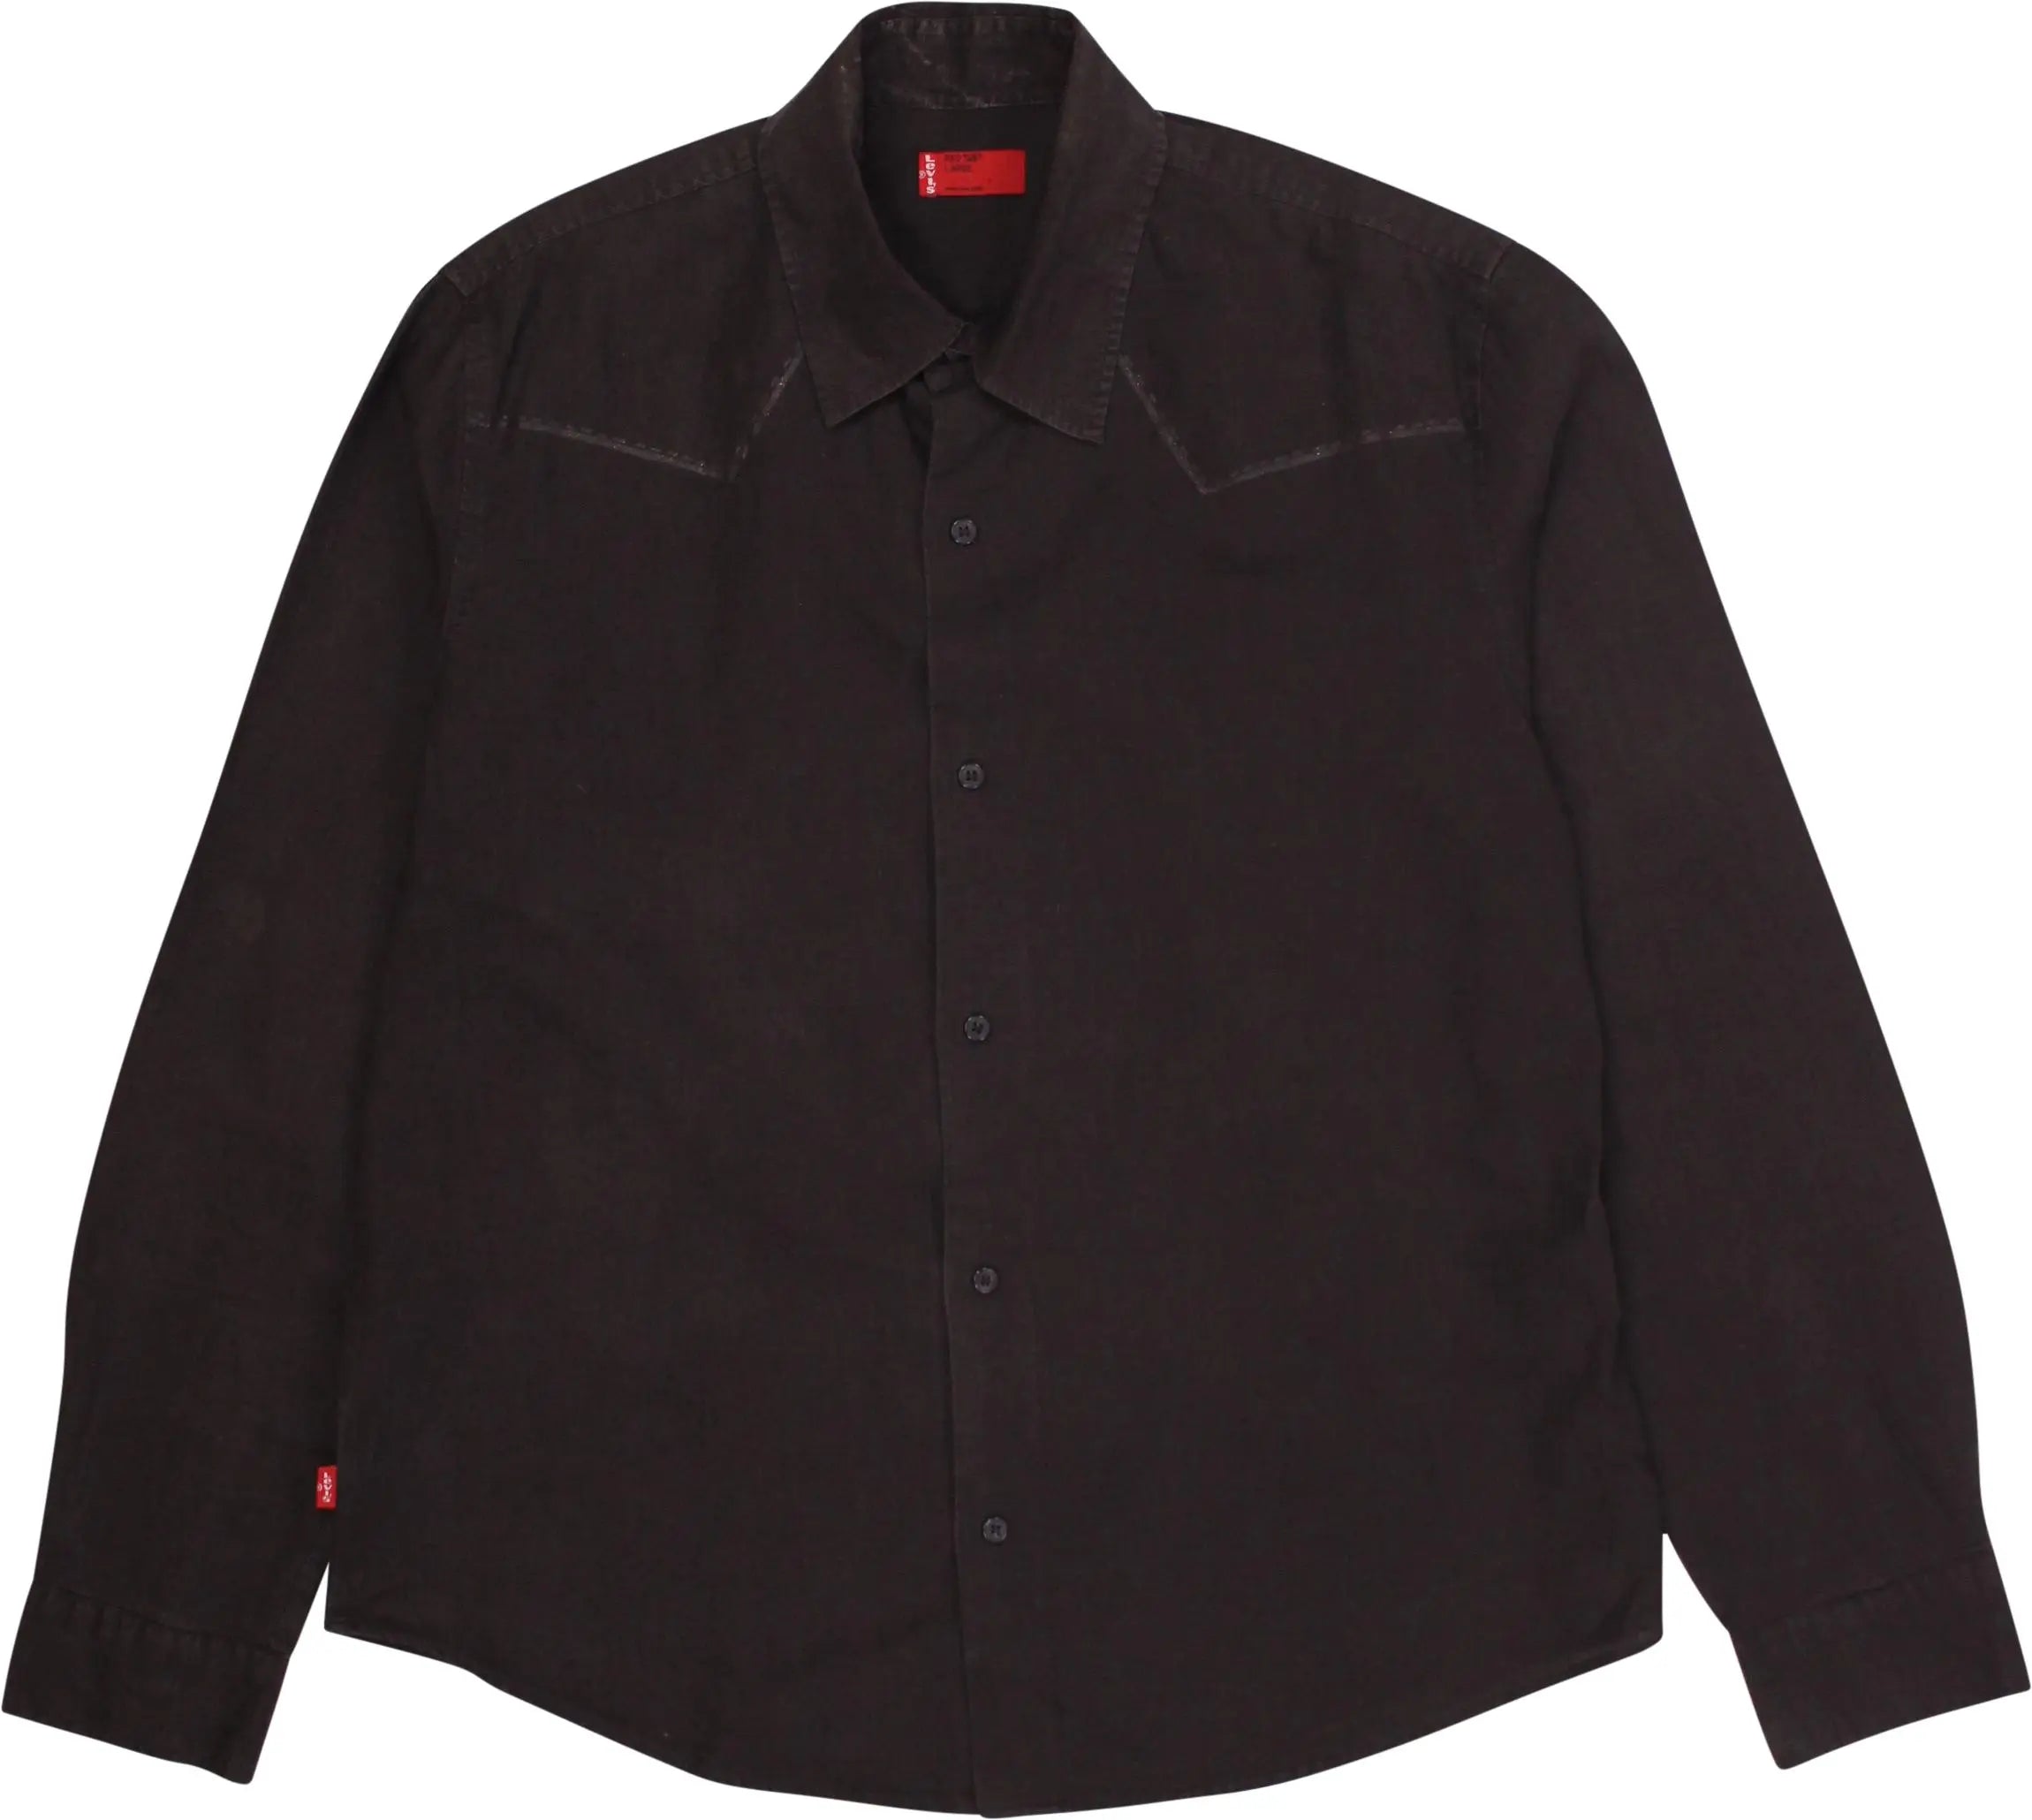 Levi's - Black Shirt by Levi's- ThriftTale.com - Vintage and second handclothing